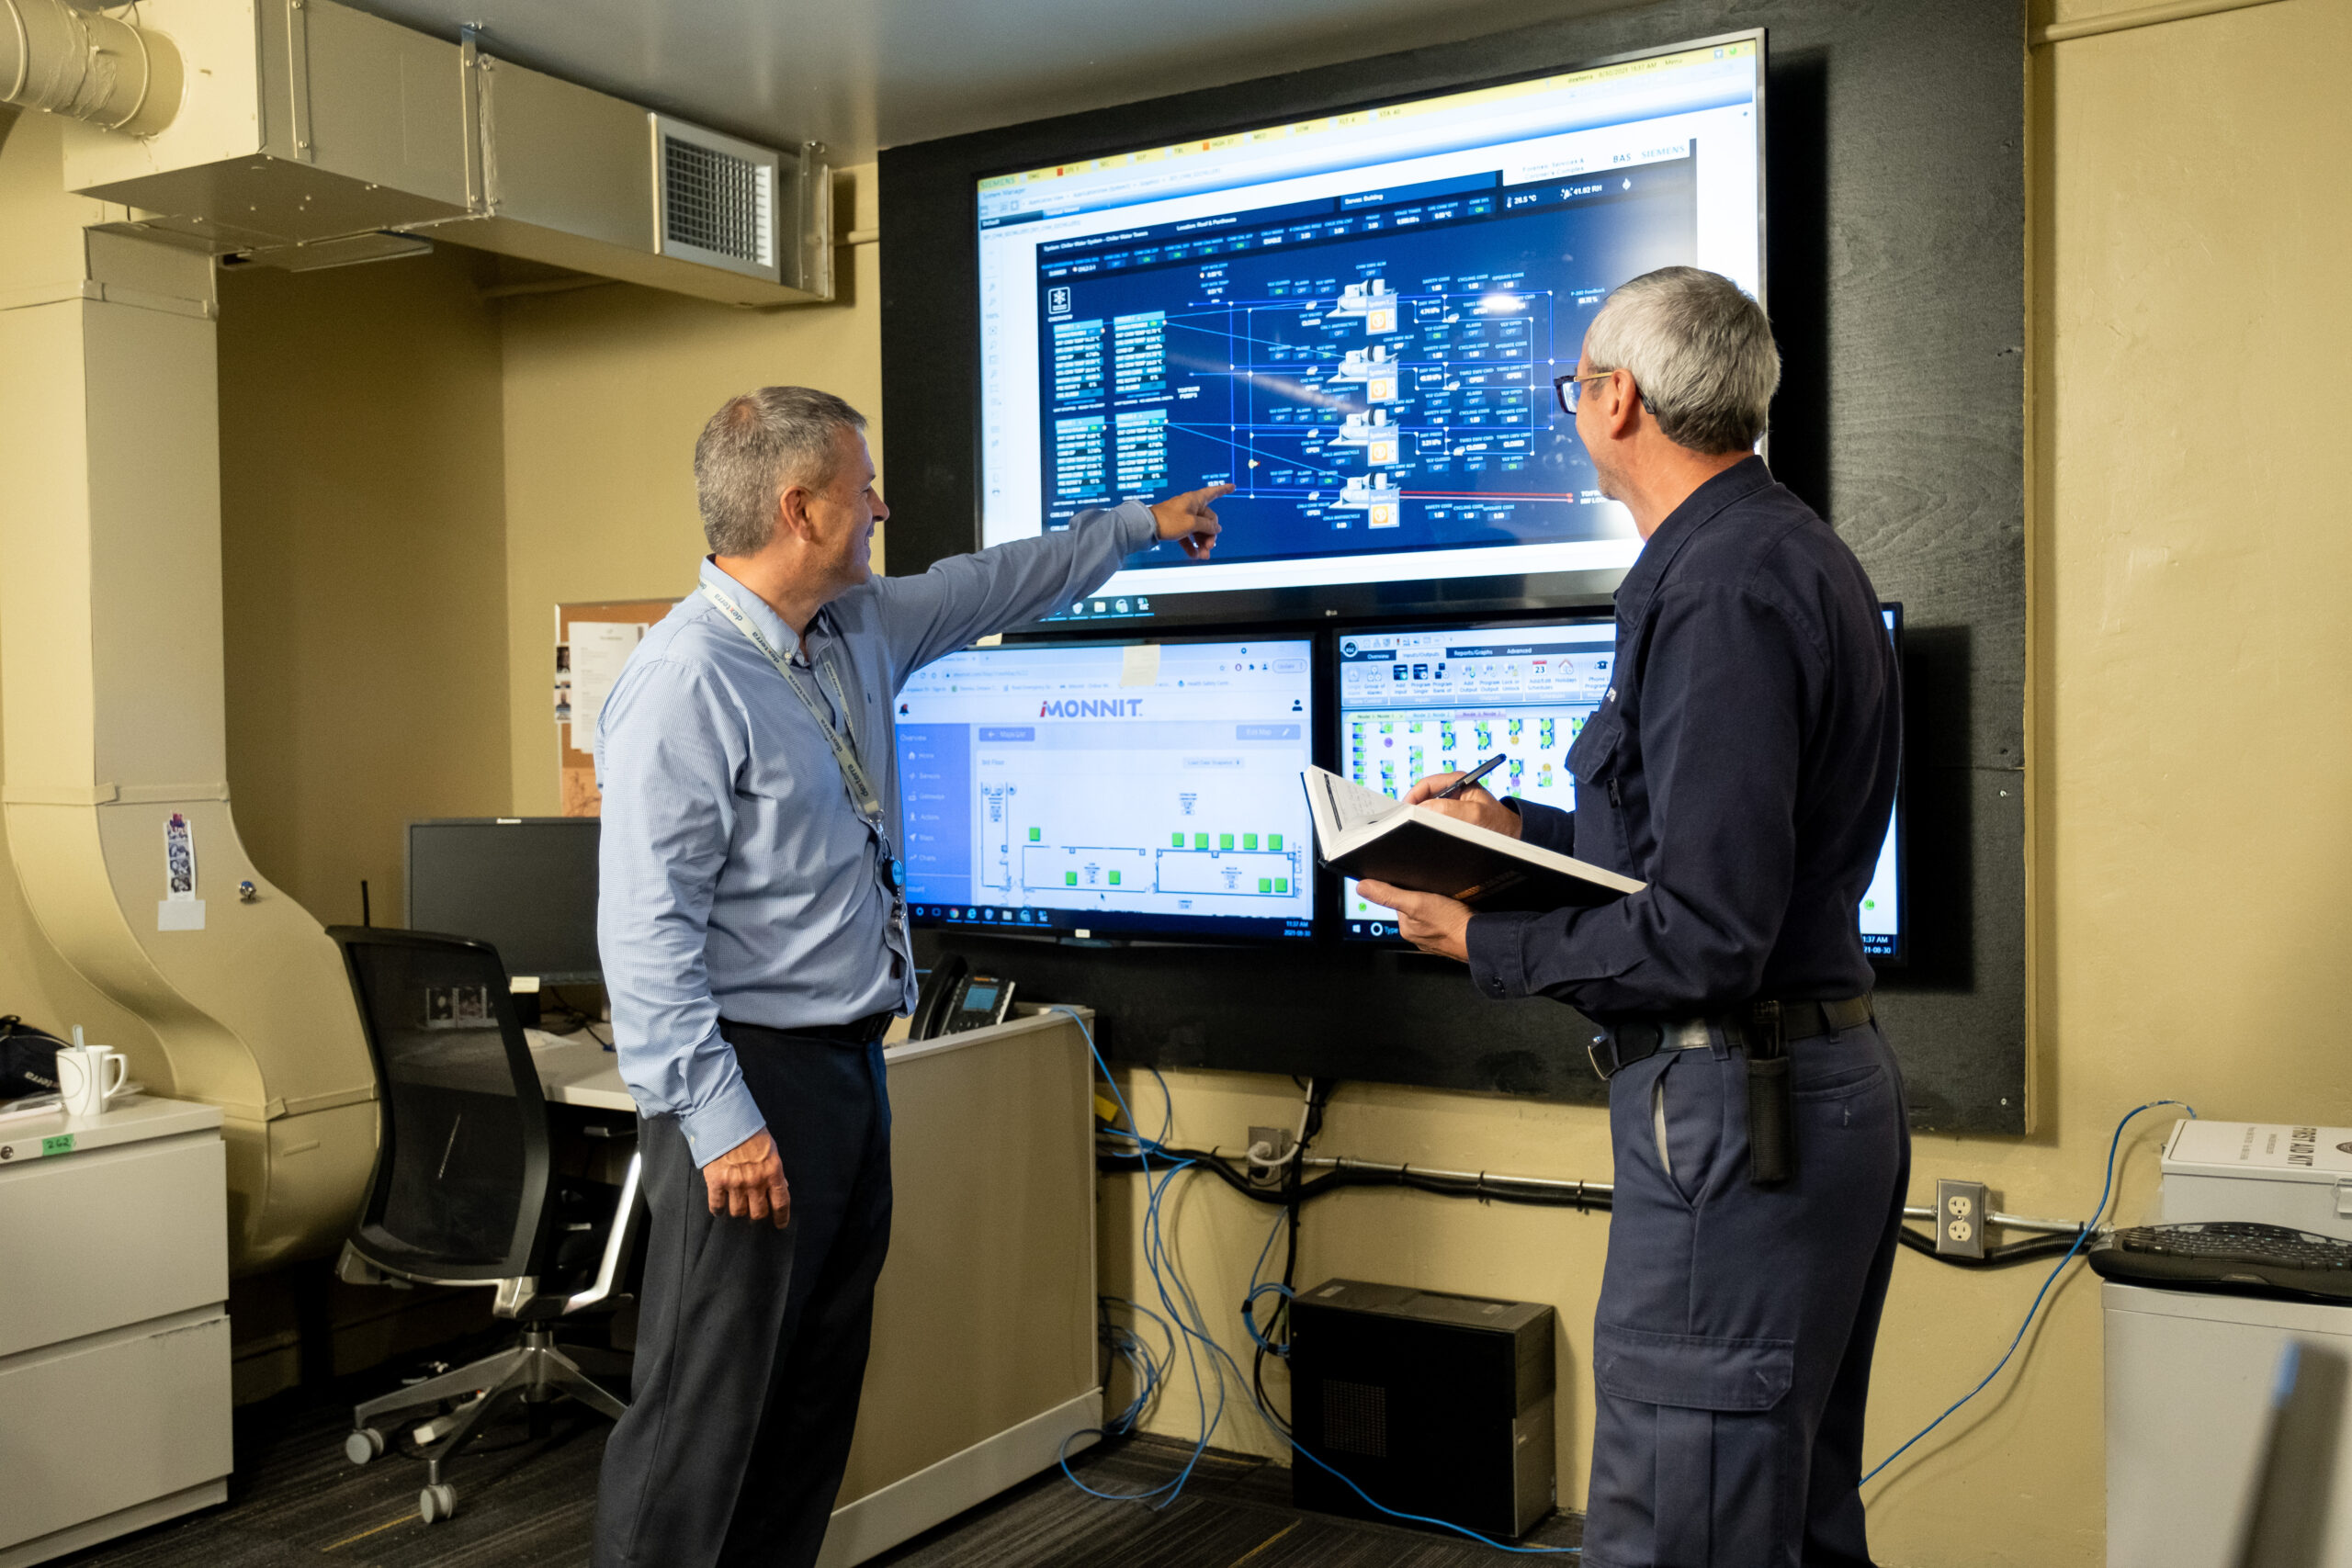 Man pointing at screen showing facility operations graphic